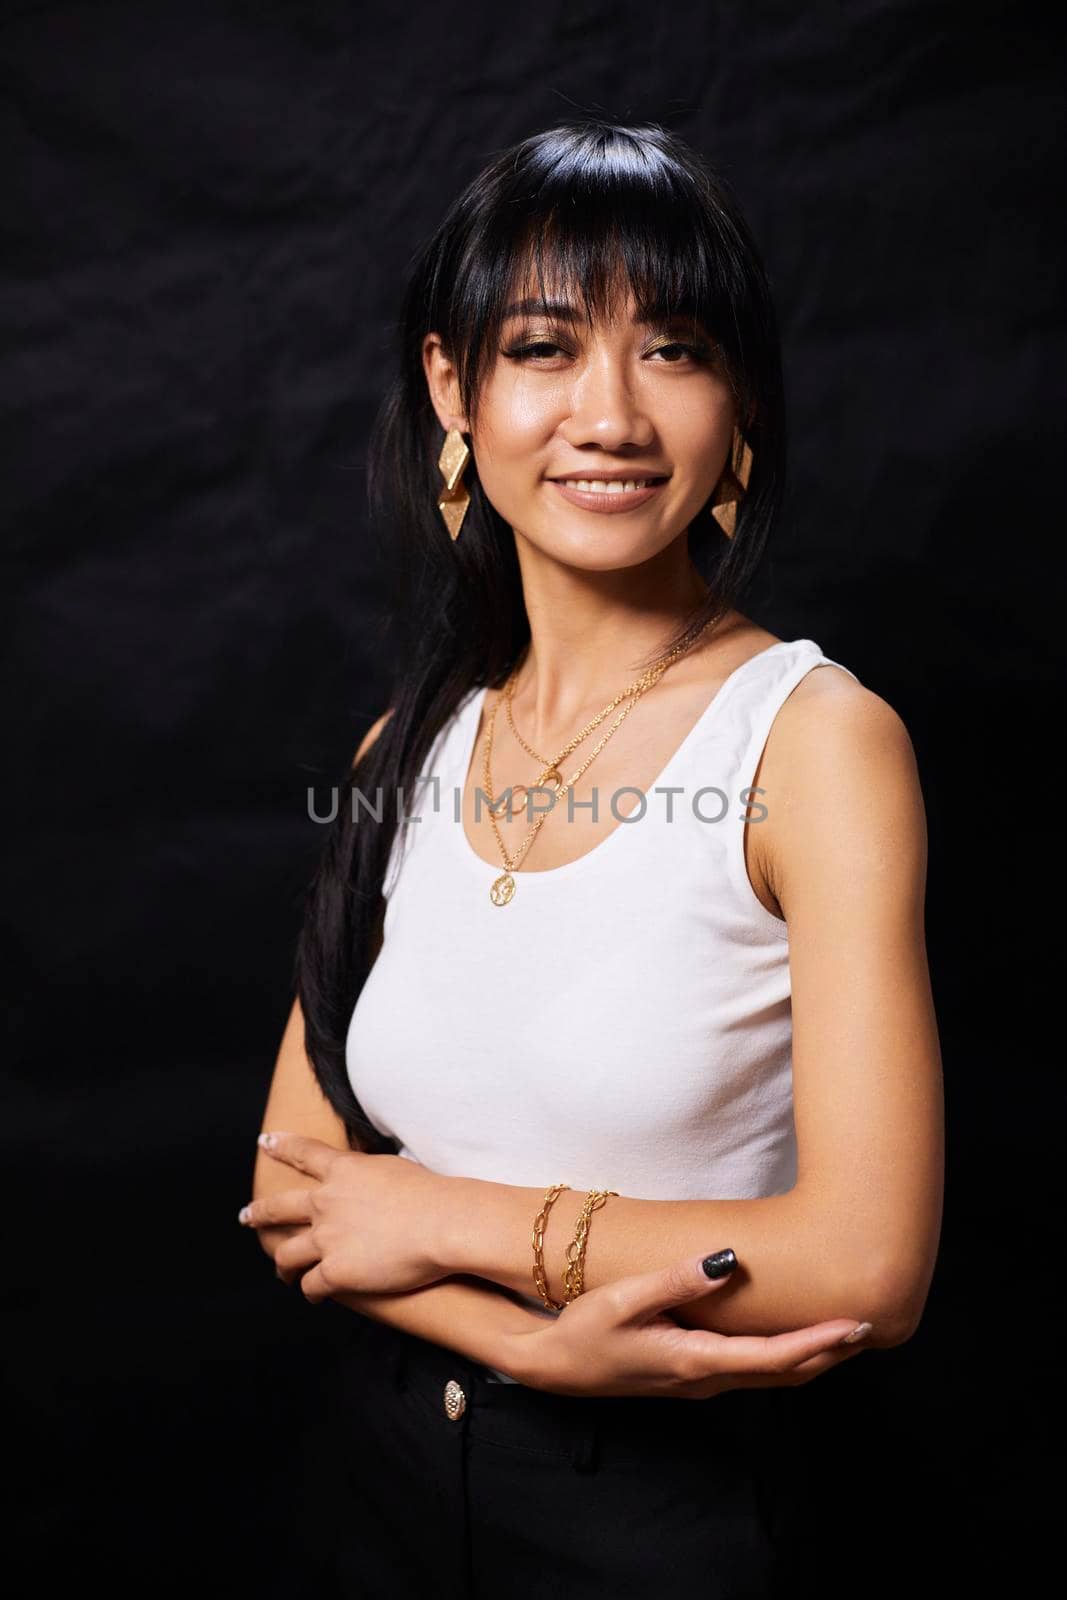 portrait shot of young happy asian or vietnamese woman, enjoying lifestyle, joy, happiness, photo on black background. by mosfet_ua